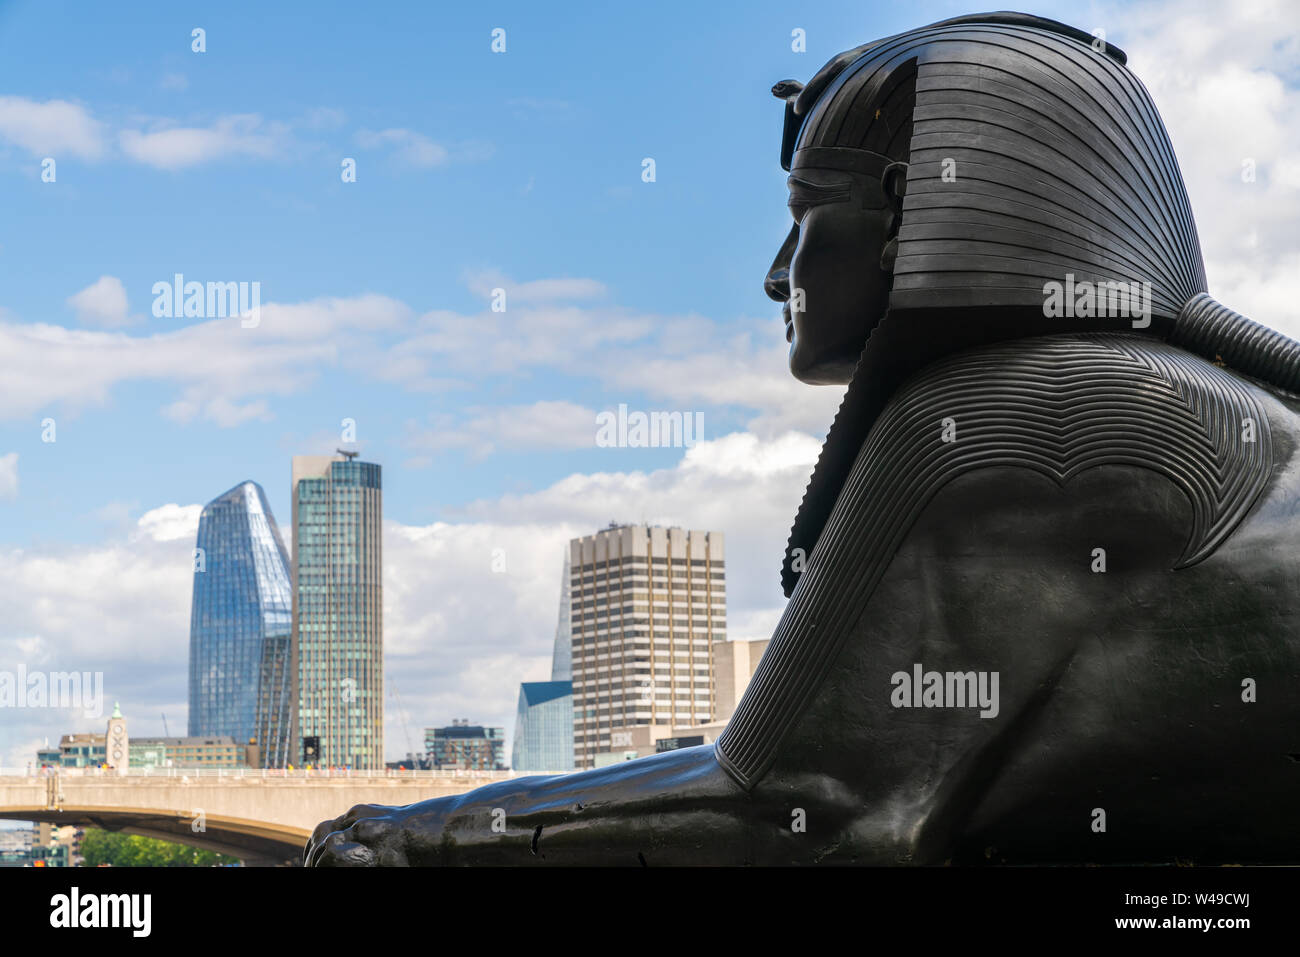 20th July 2019 - London, UK. Statue of the Sphinx at Cleopatra's Needle, located near river Thames, Victoria Embankment. Stock Photo